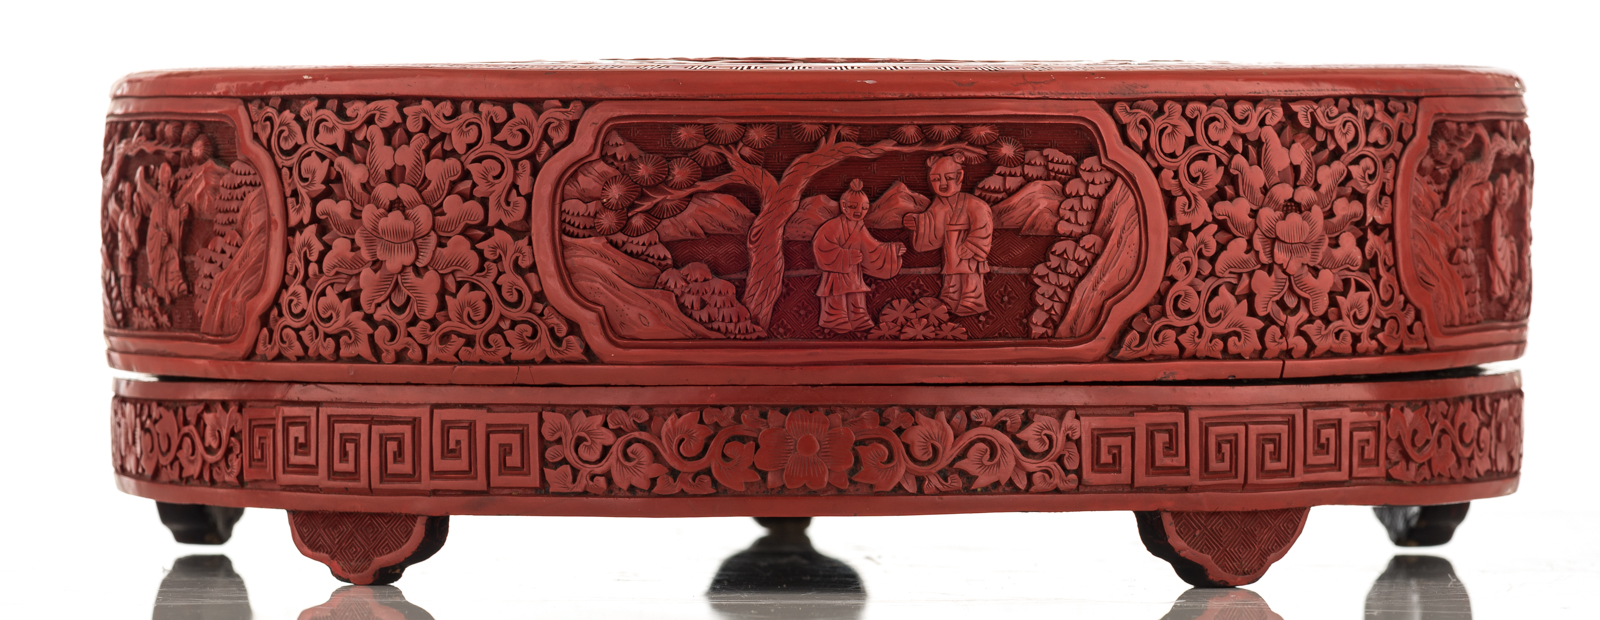 A Chinese Peking cinnabar lacquered sweetmeat box and cover, H 11,5 - ø 32,5 cm - Image 4 of 8